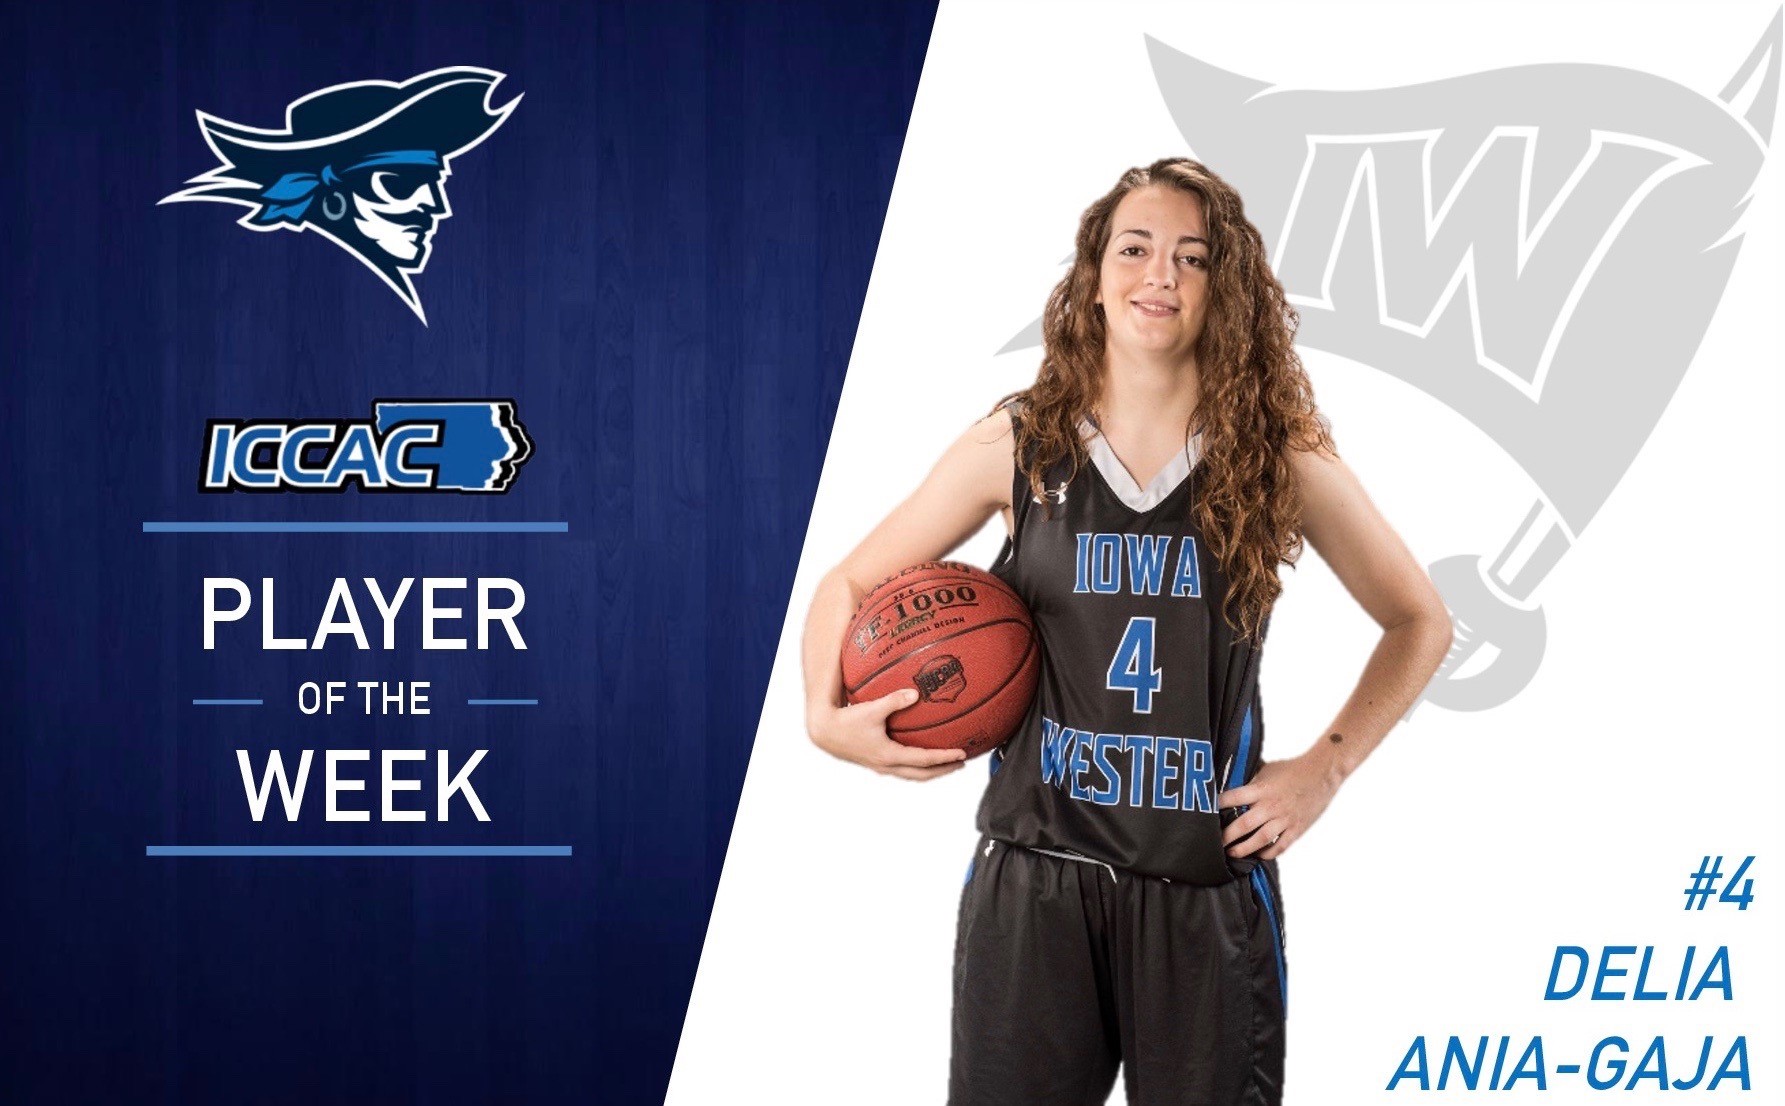 Delia Ania-Gaja Named the ICCAC Player of the Week